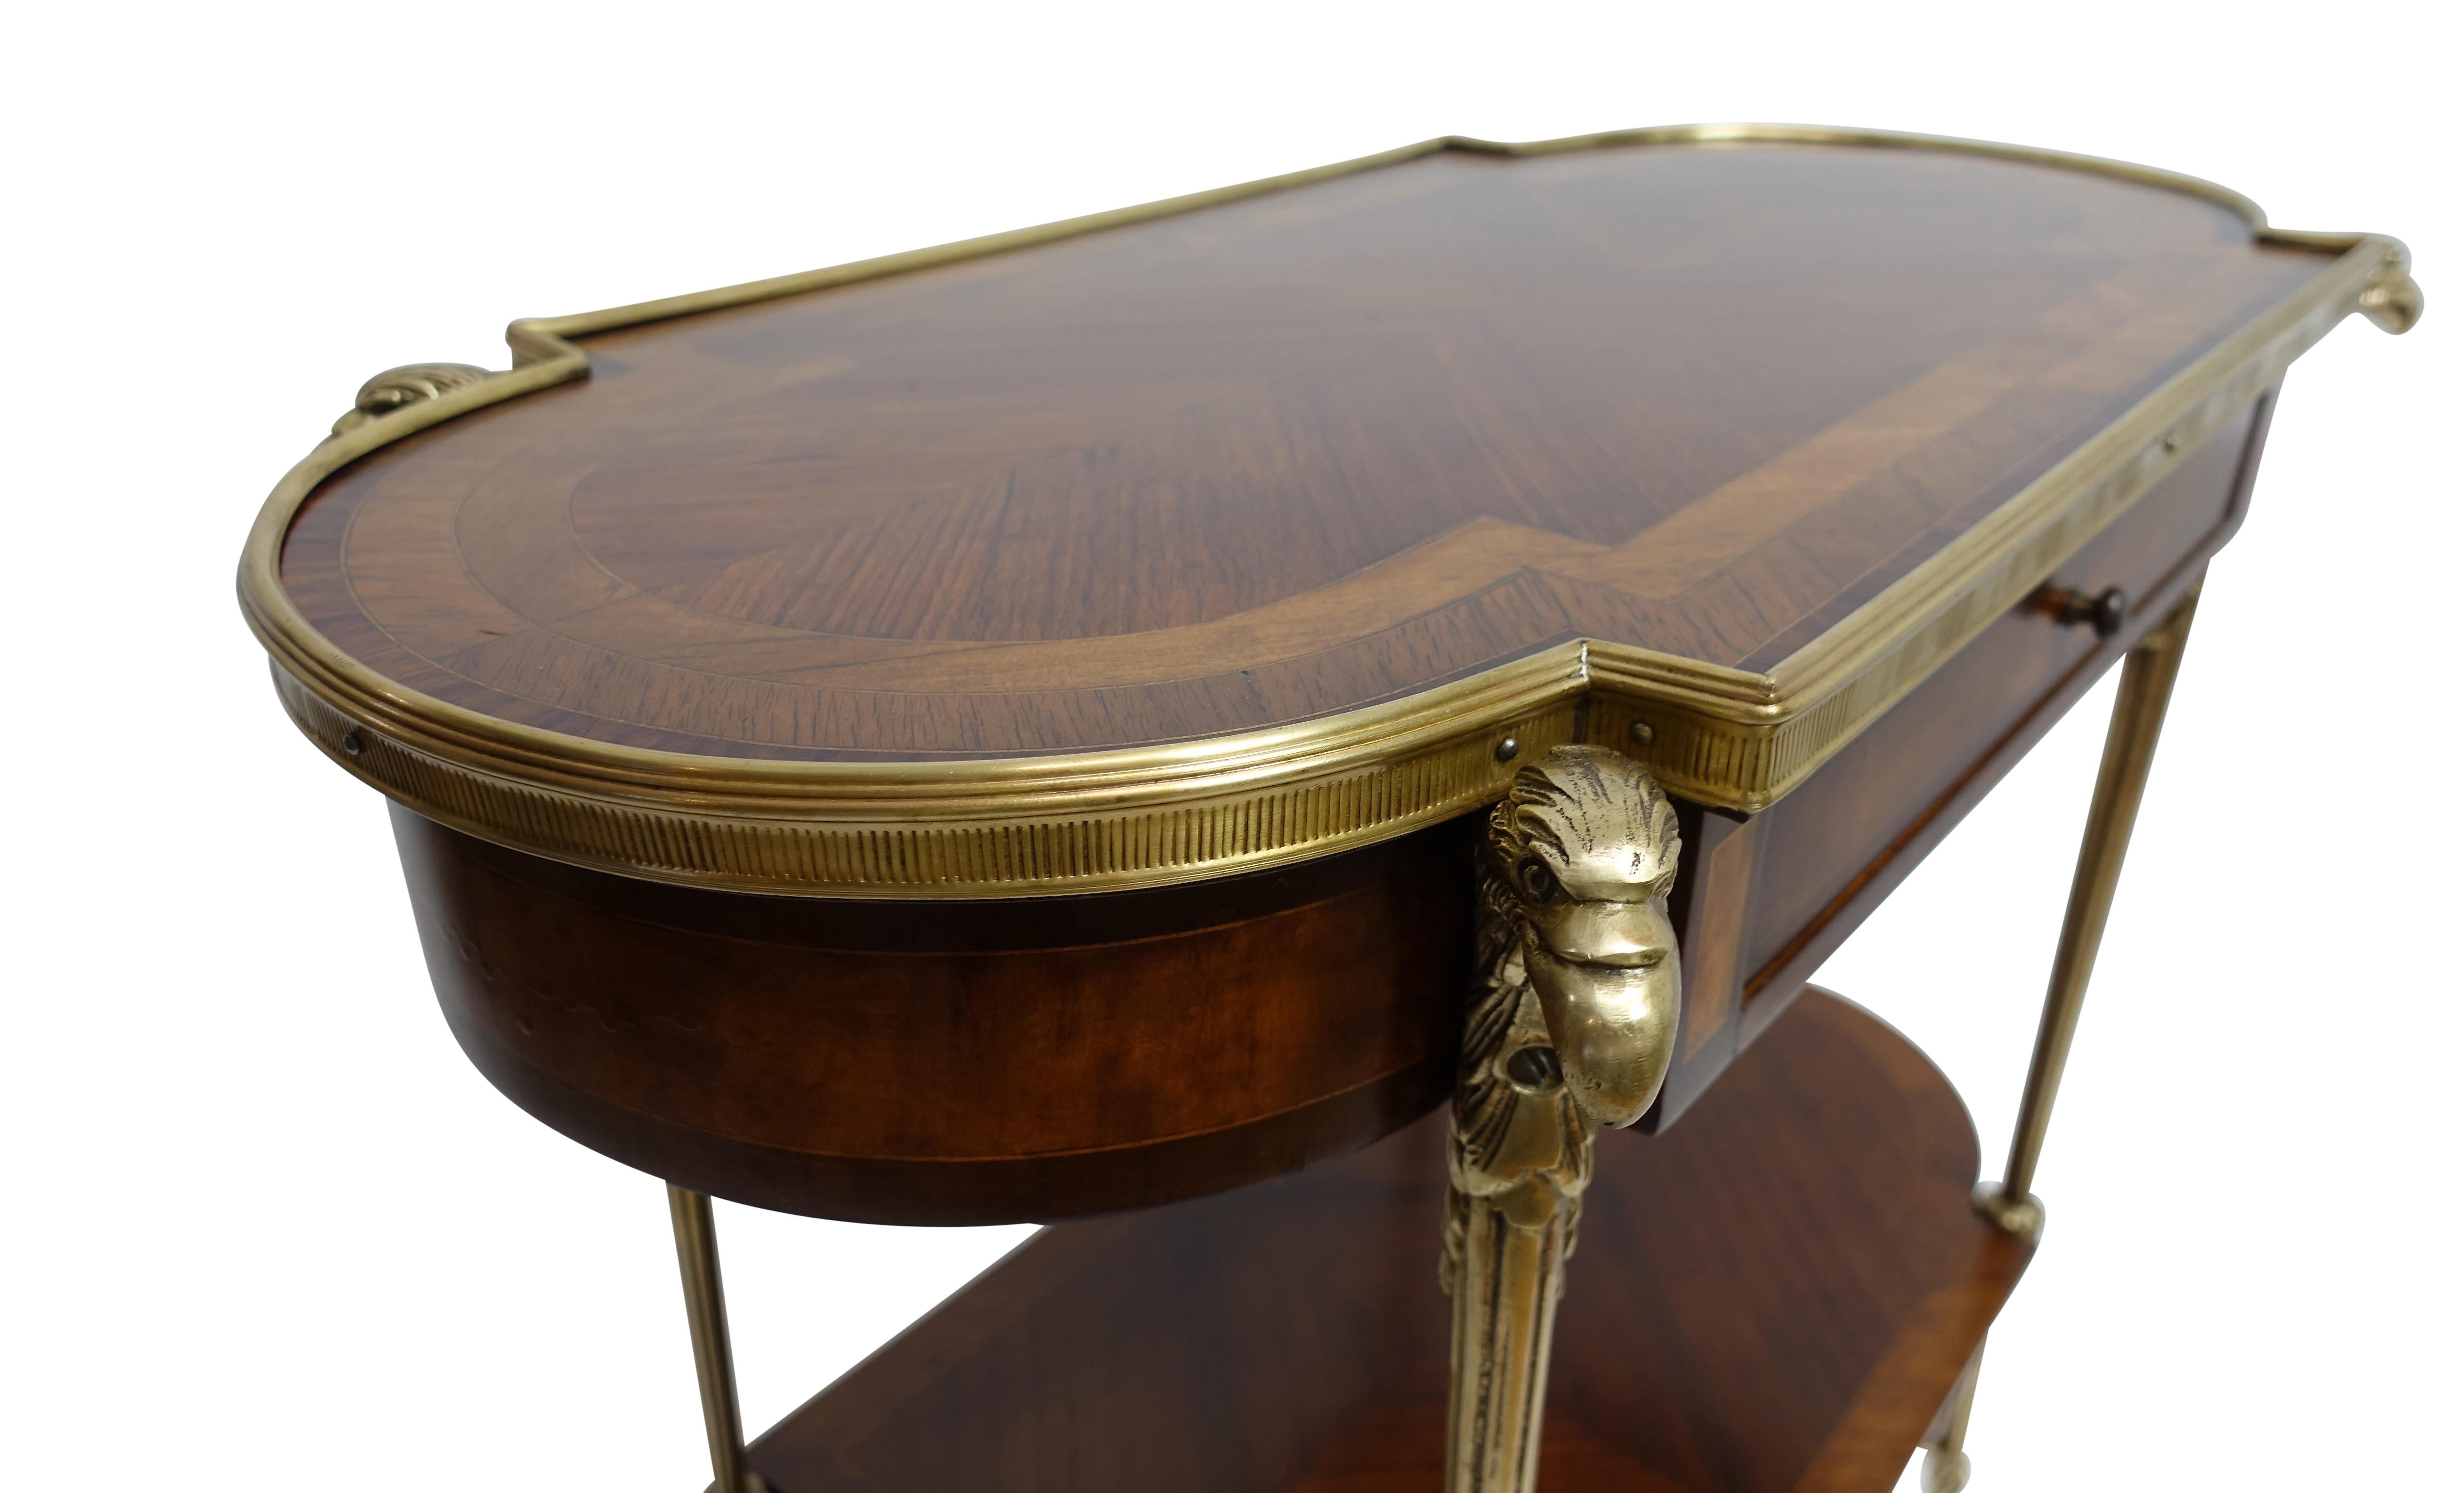 20th Century French Empire Style Mahogany and Walnut Inlay Side Table with Brass Mounts